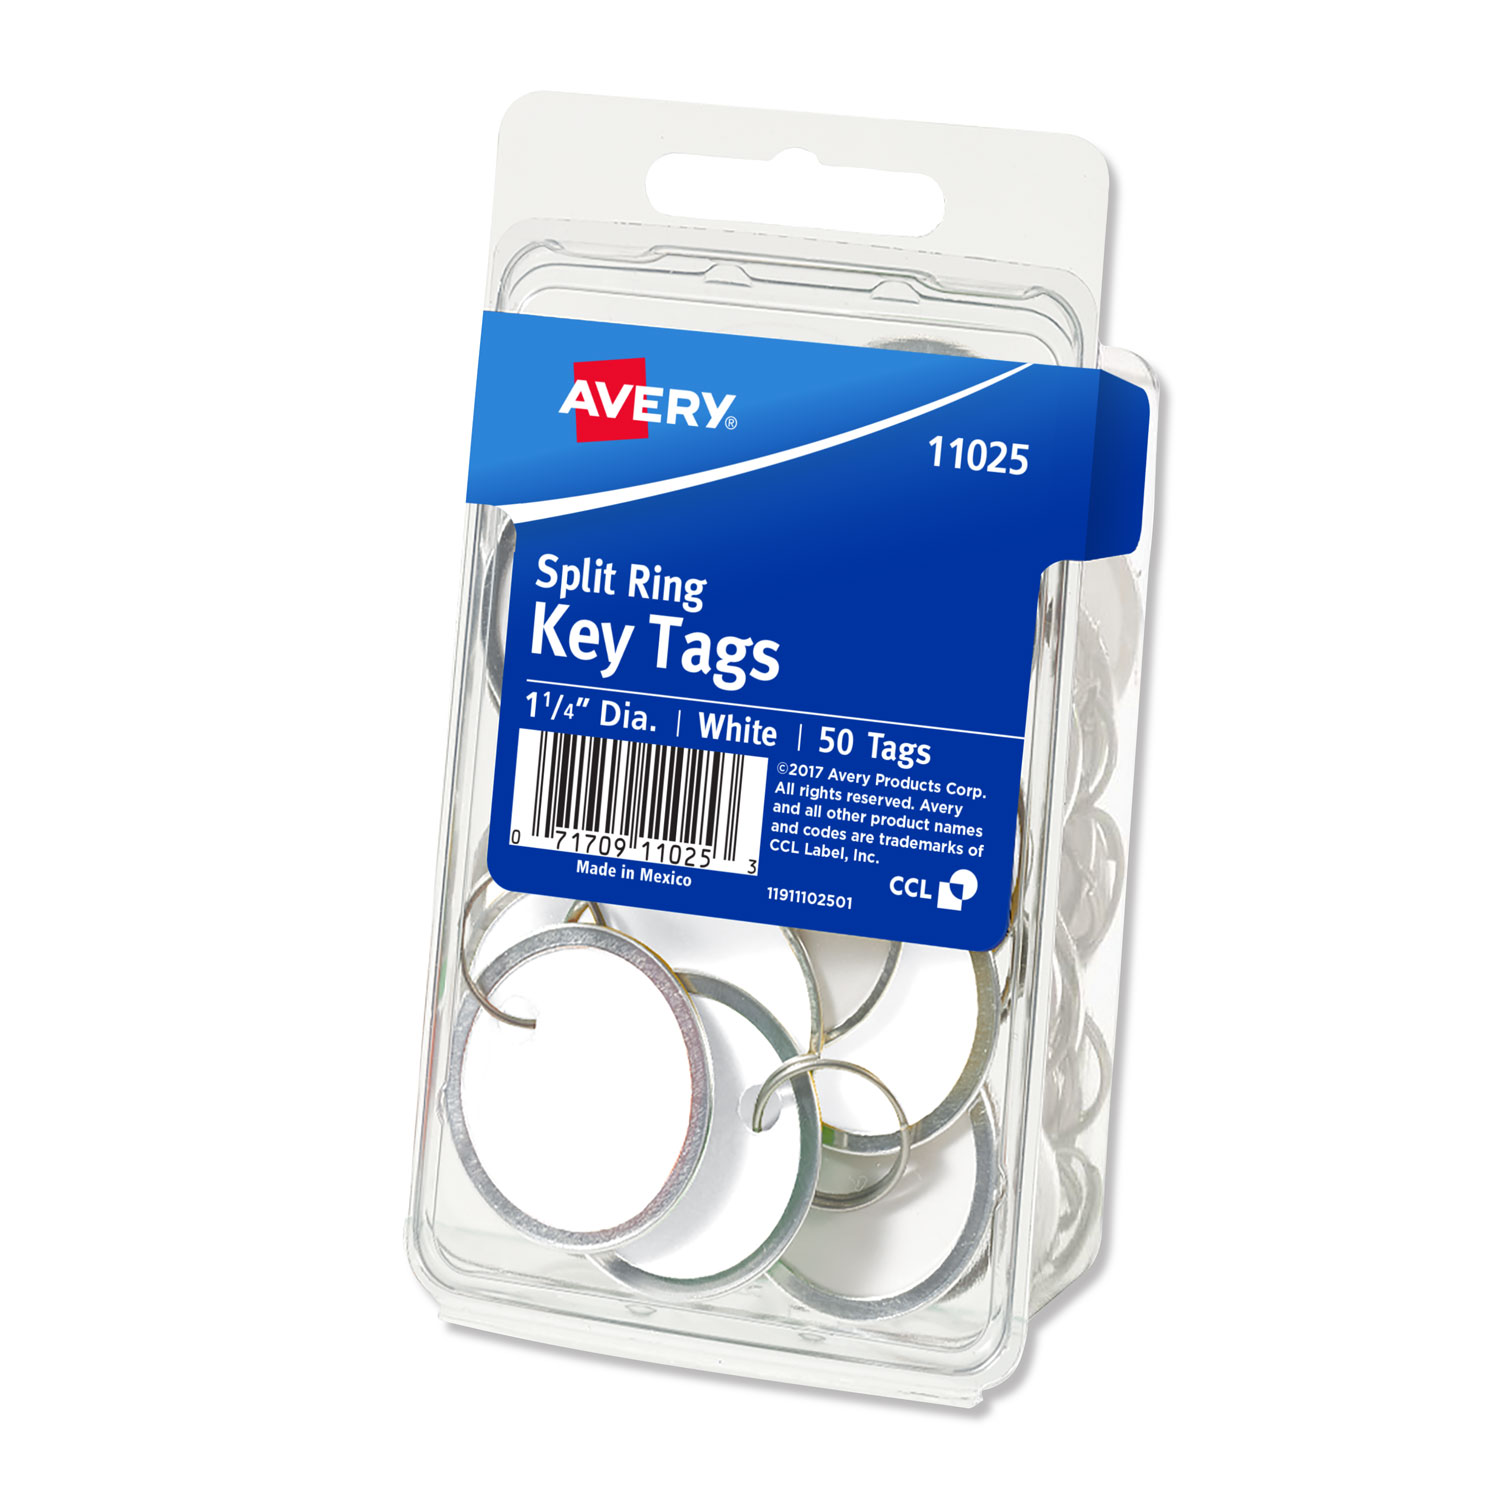  Avery 11025 Key Tags with Split Ring, 1 1/4 dia, White, 50/Pack (AVE11025) 